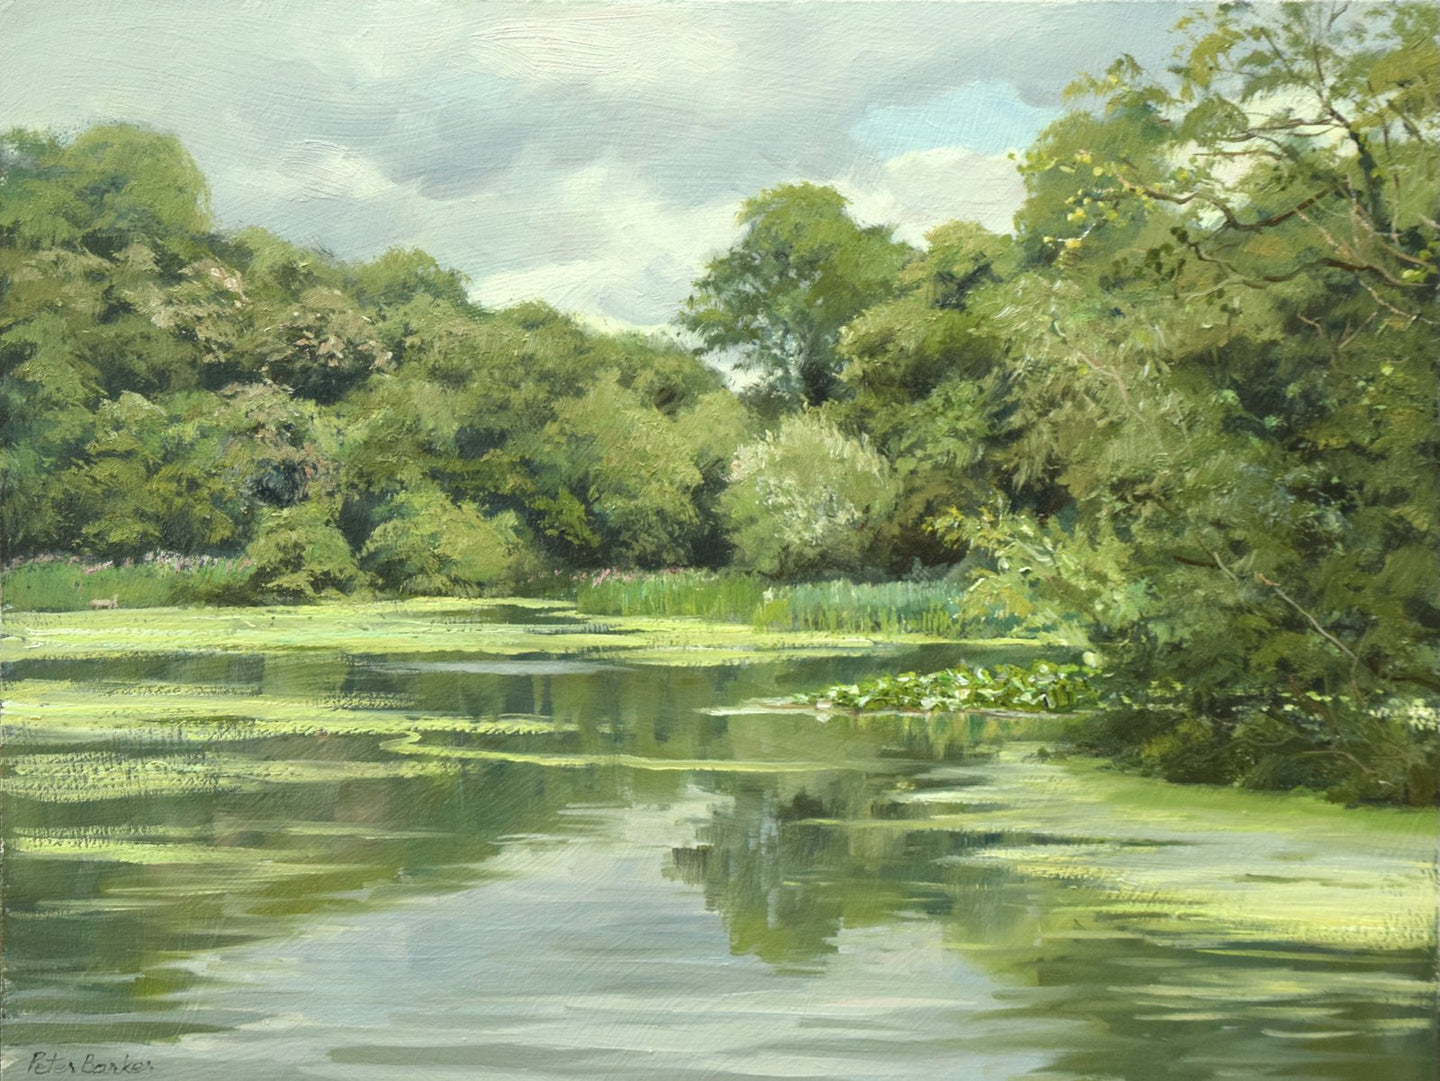 9 x 12 inch oil, painted on site at Renishaw Lake, with lots of greens abounding, trees all around a still lake.